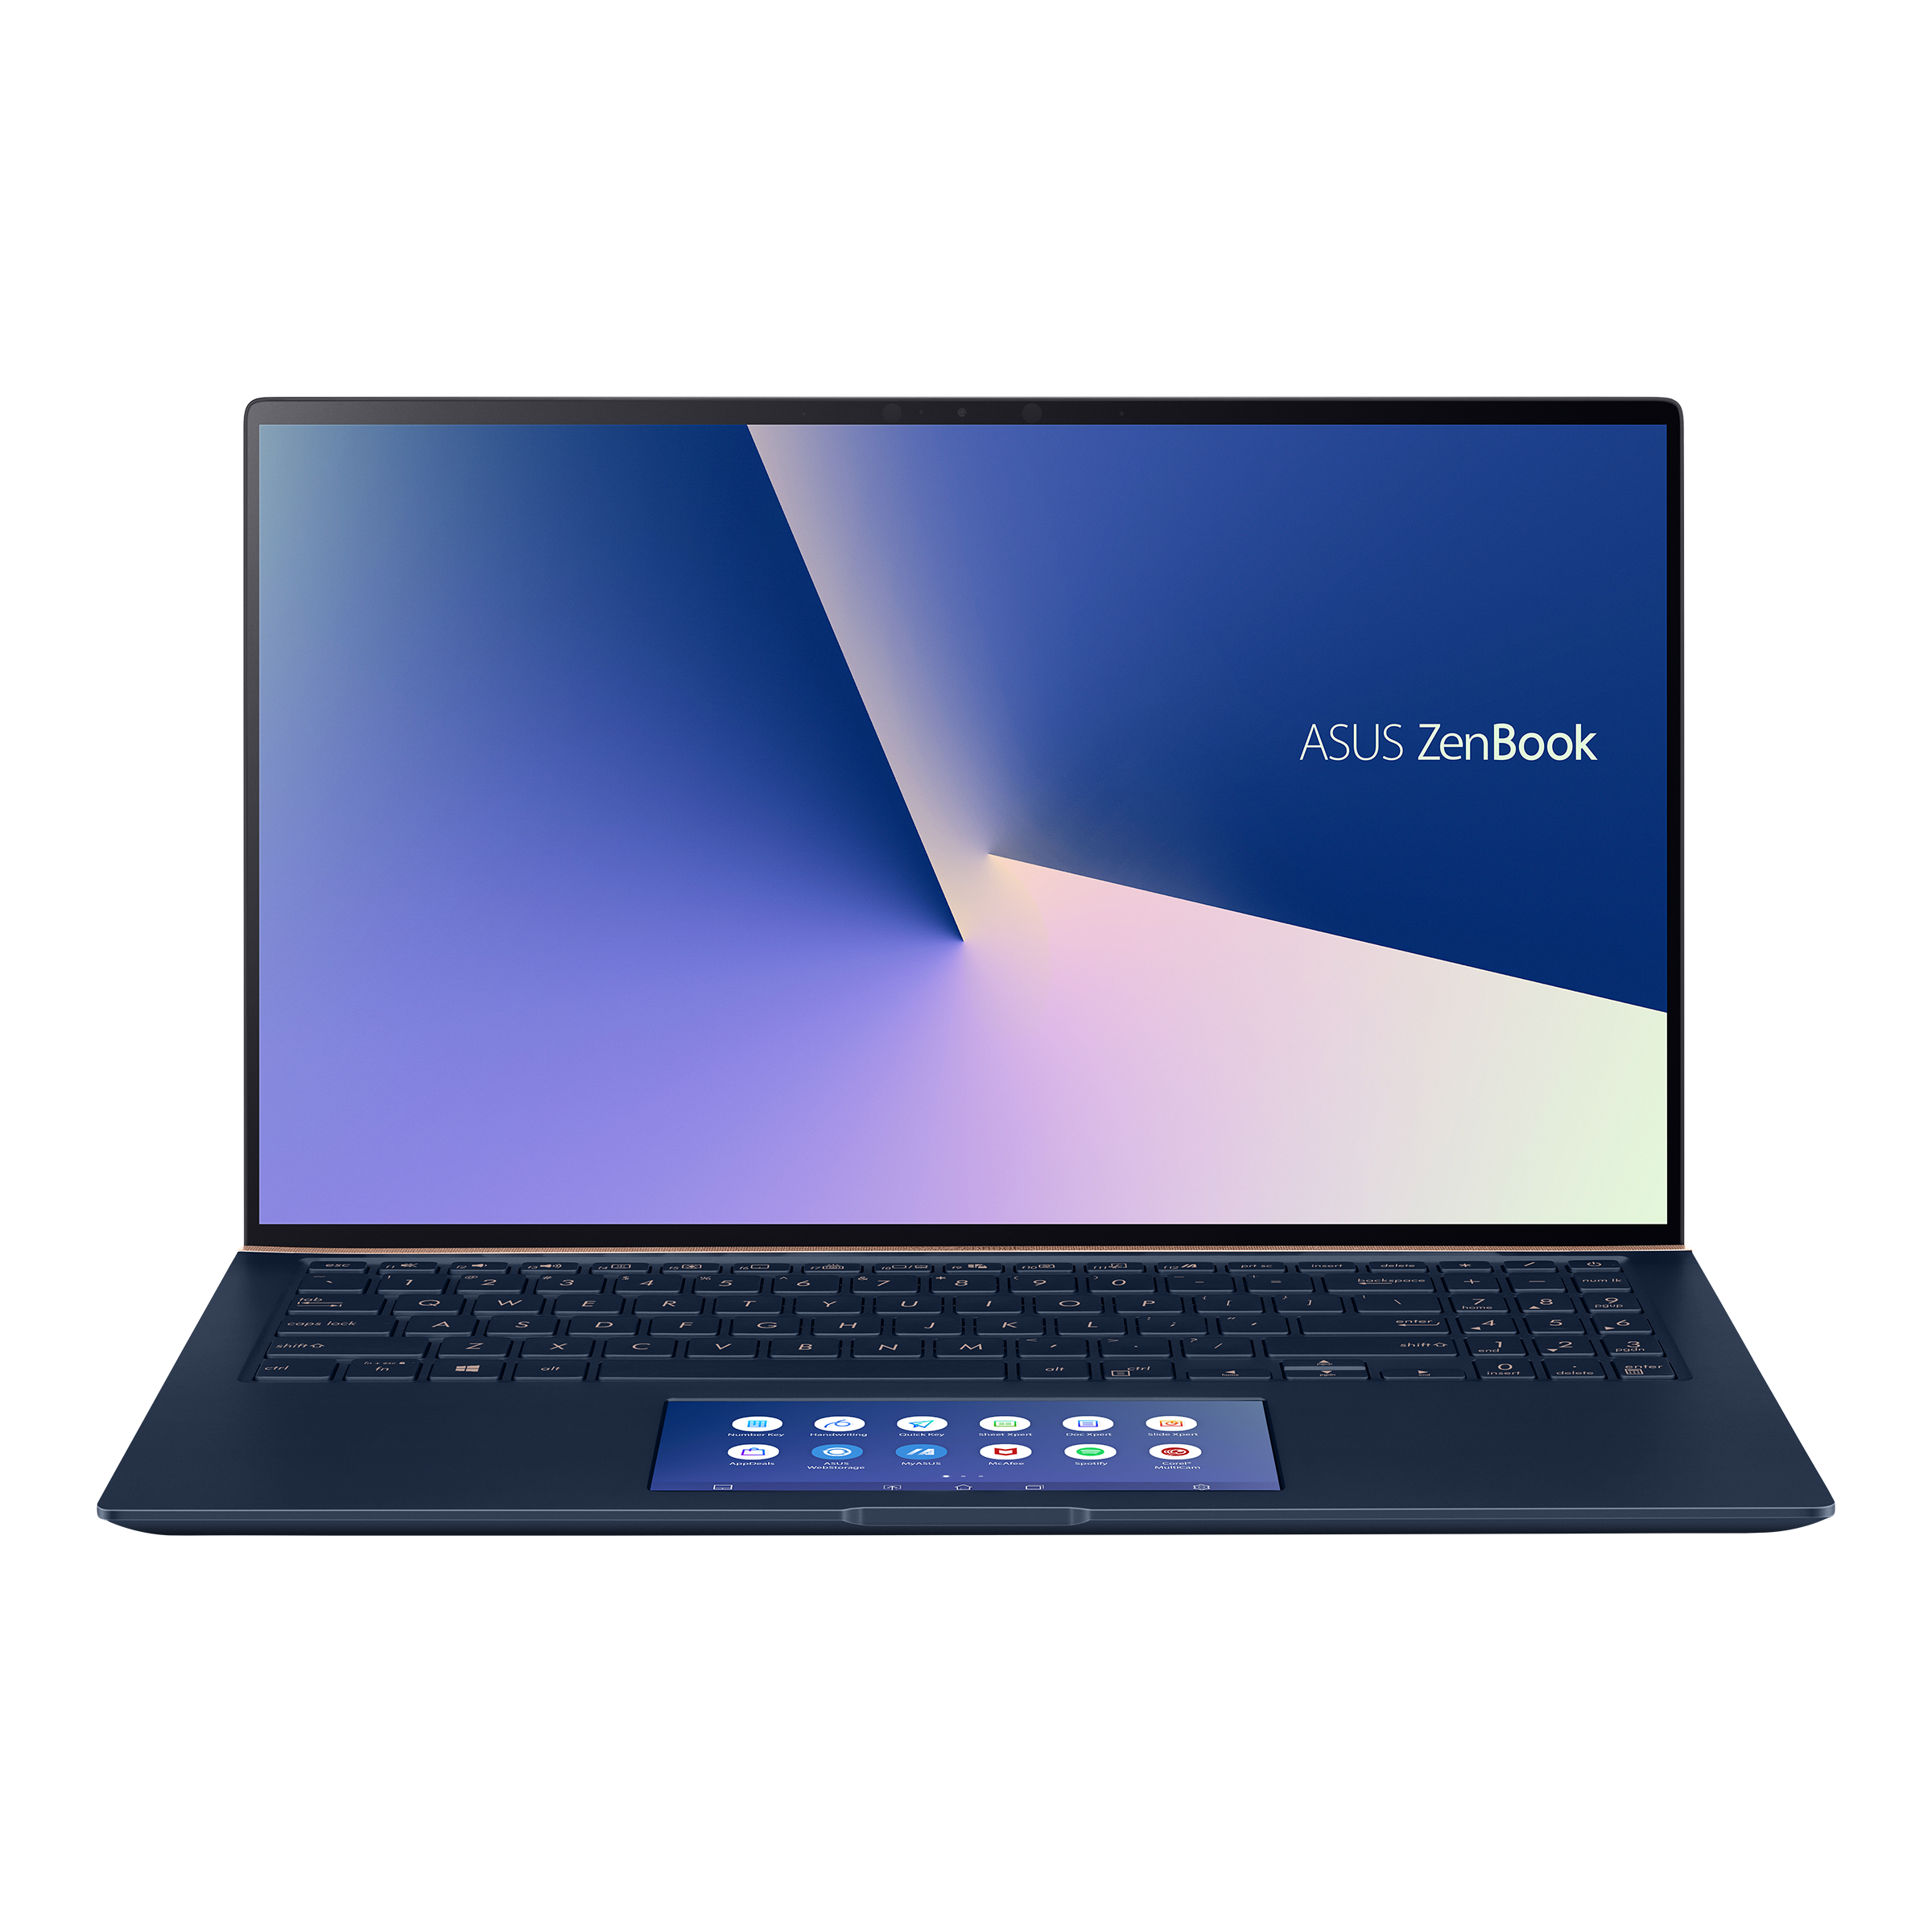 ASUS Zenbook 15 UX534｜Laptops For Home｜ASUS USA